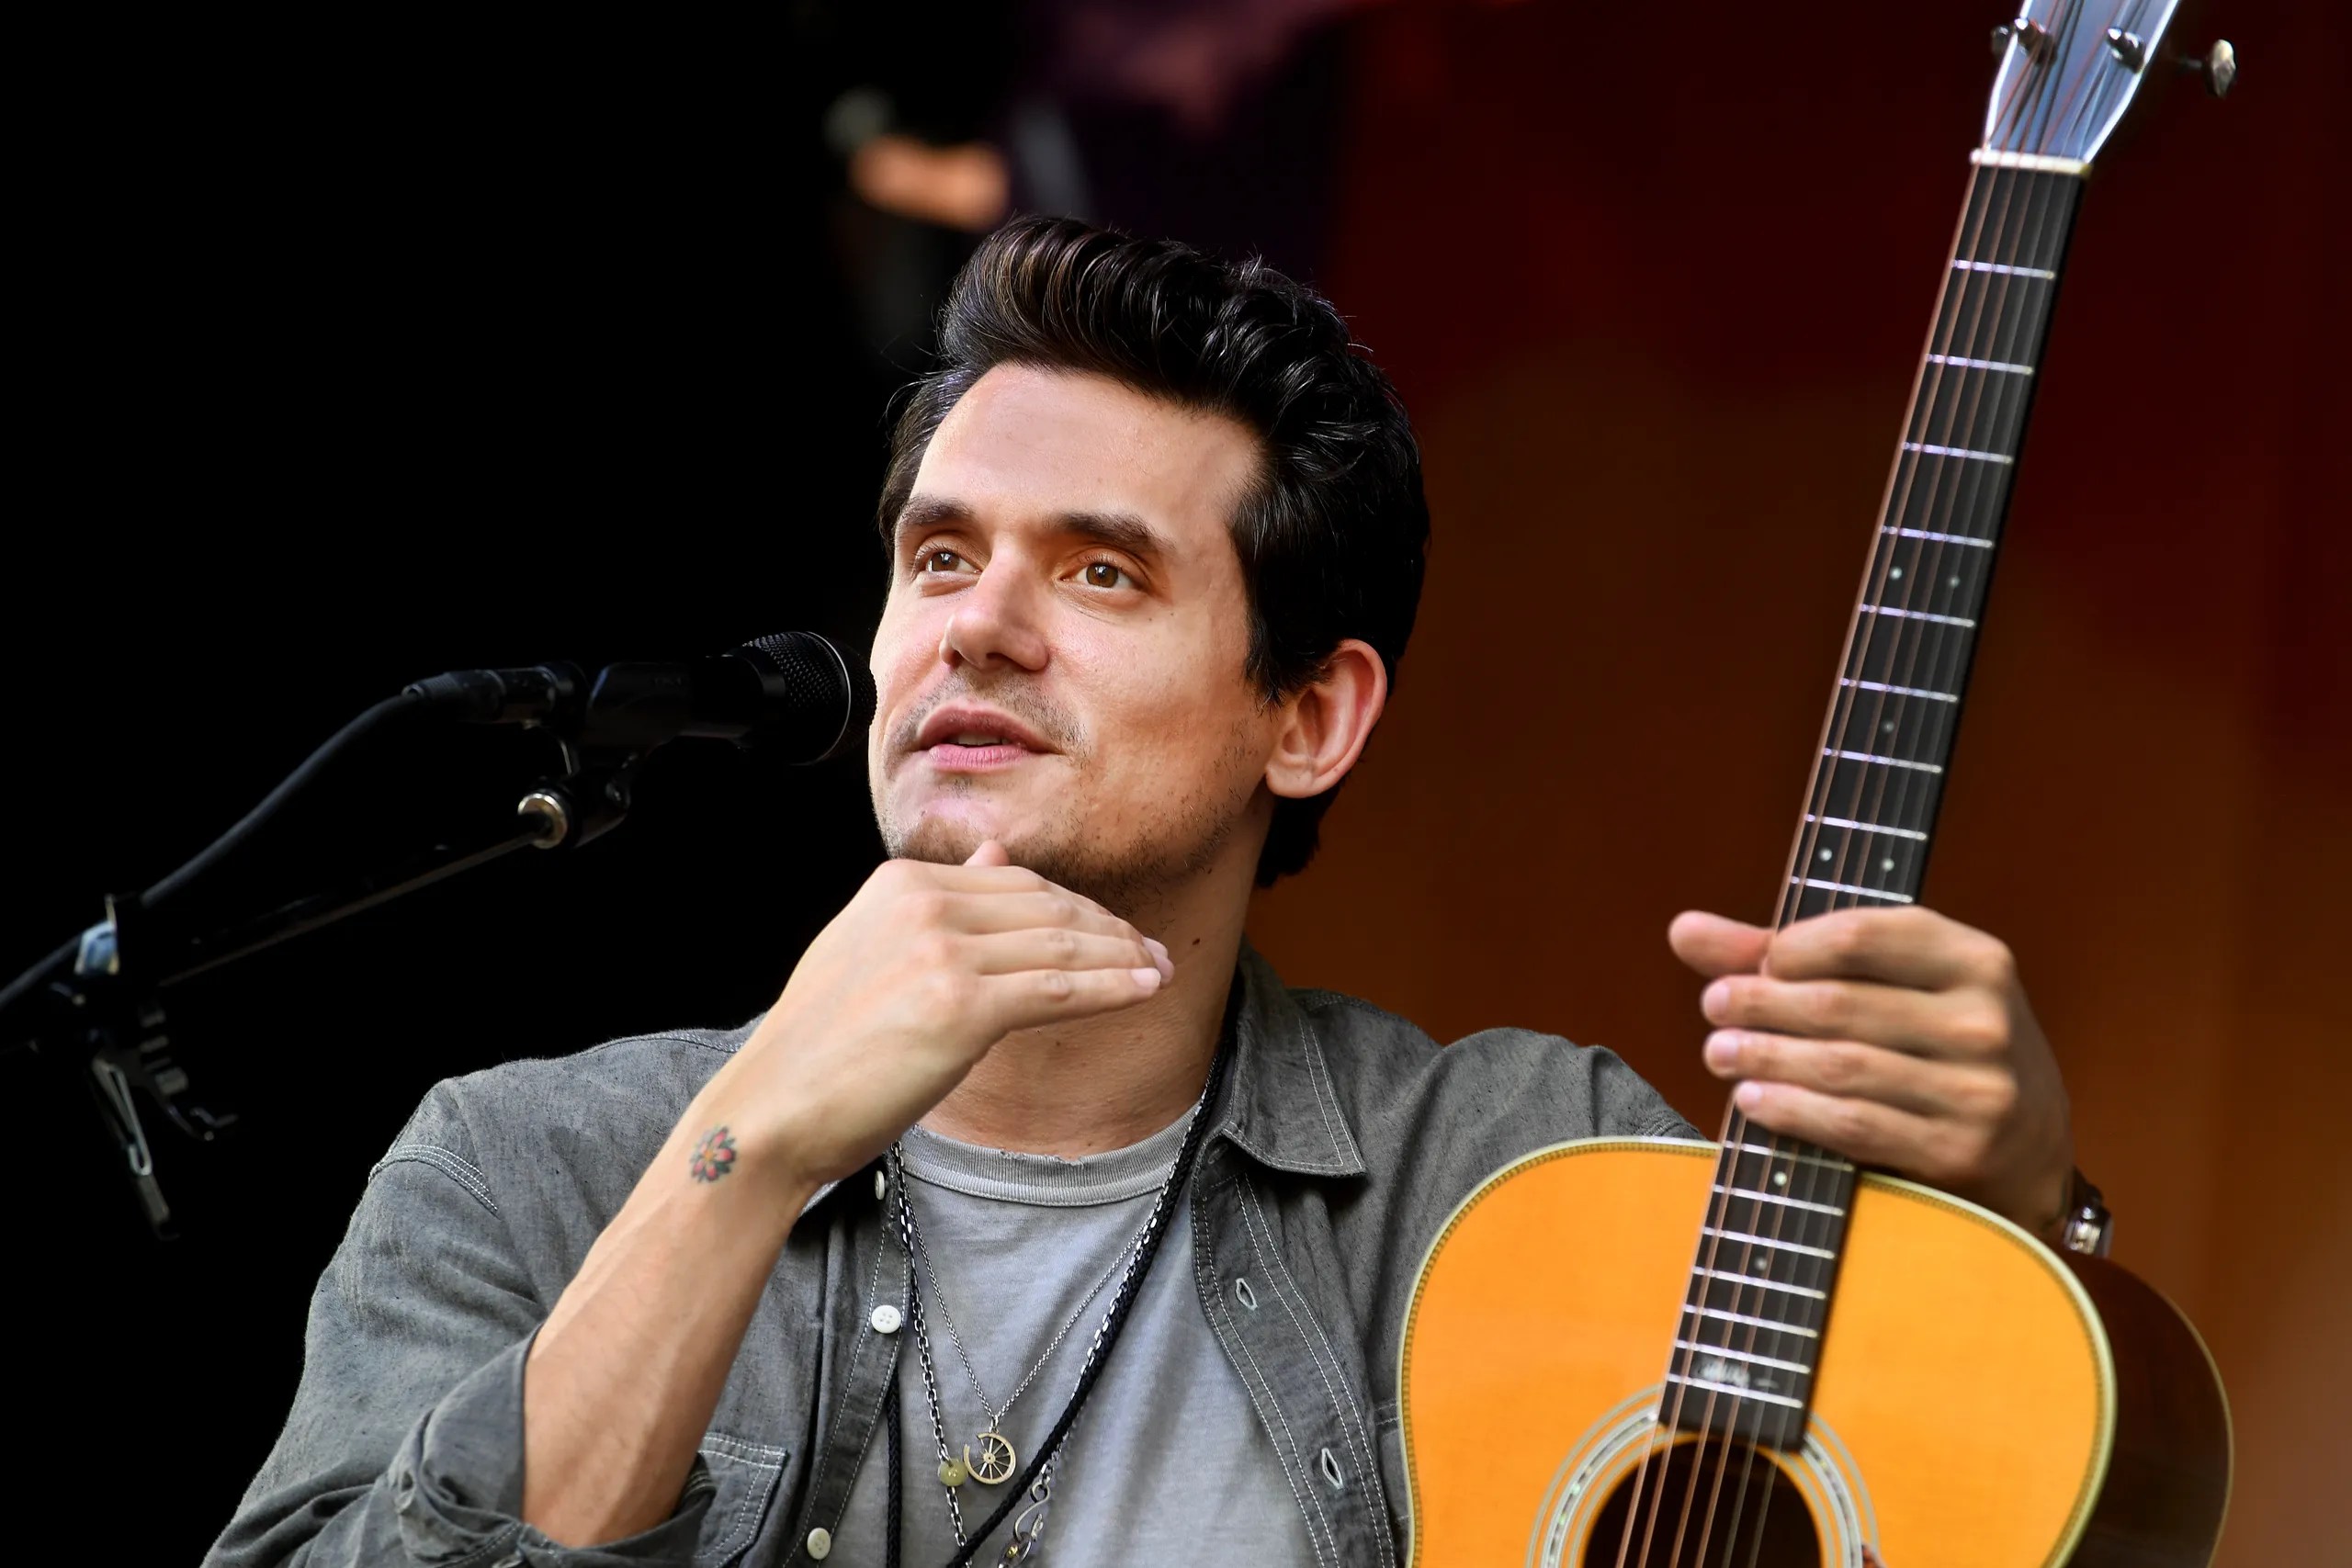 John Mayer Spoofed That Viral Celebrity ‘Imagine’ Video, and I Can’t